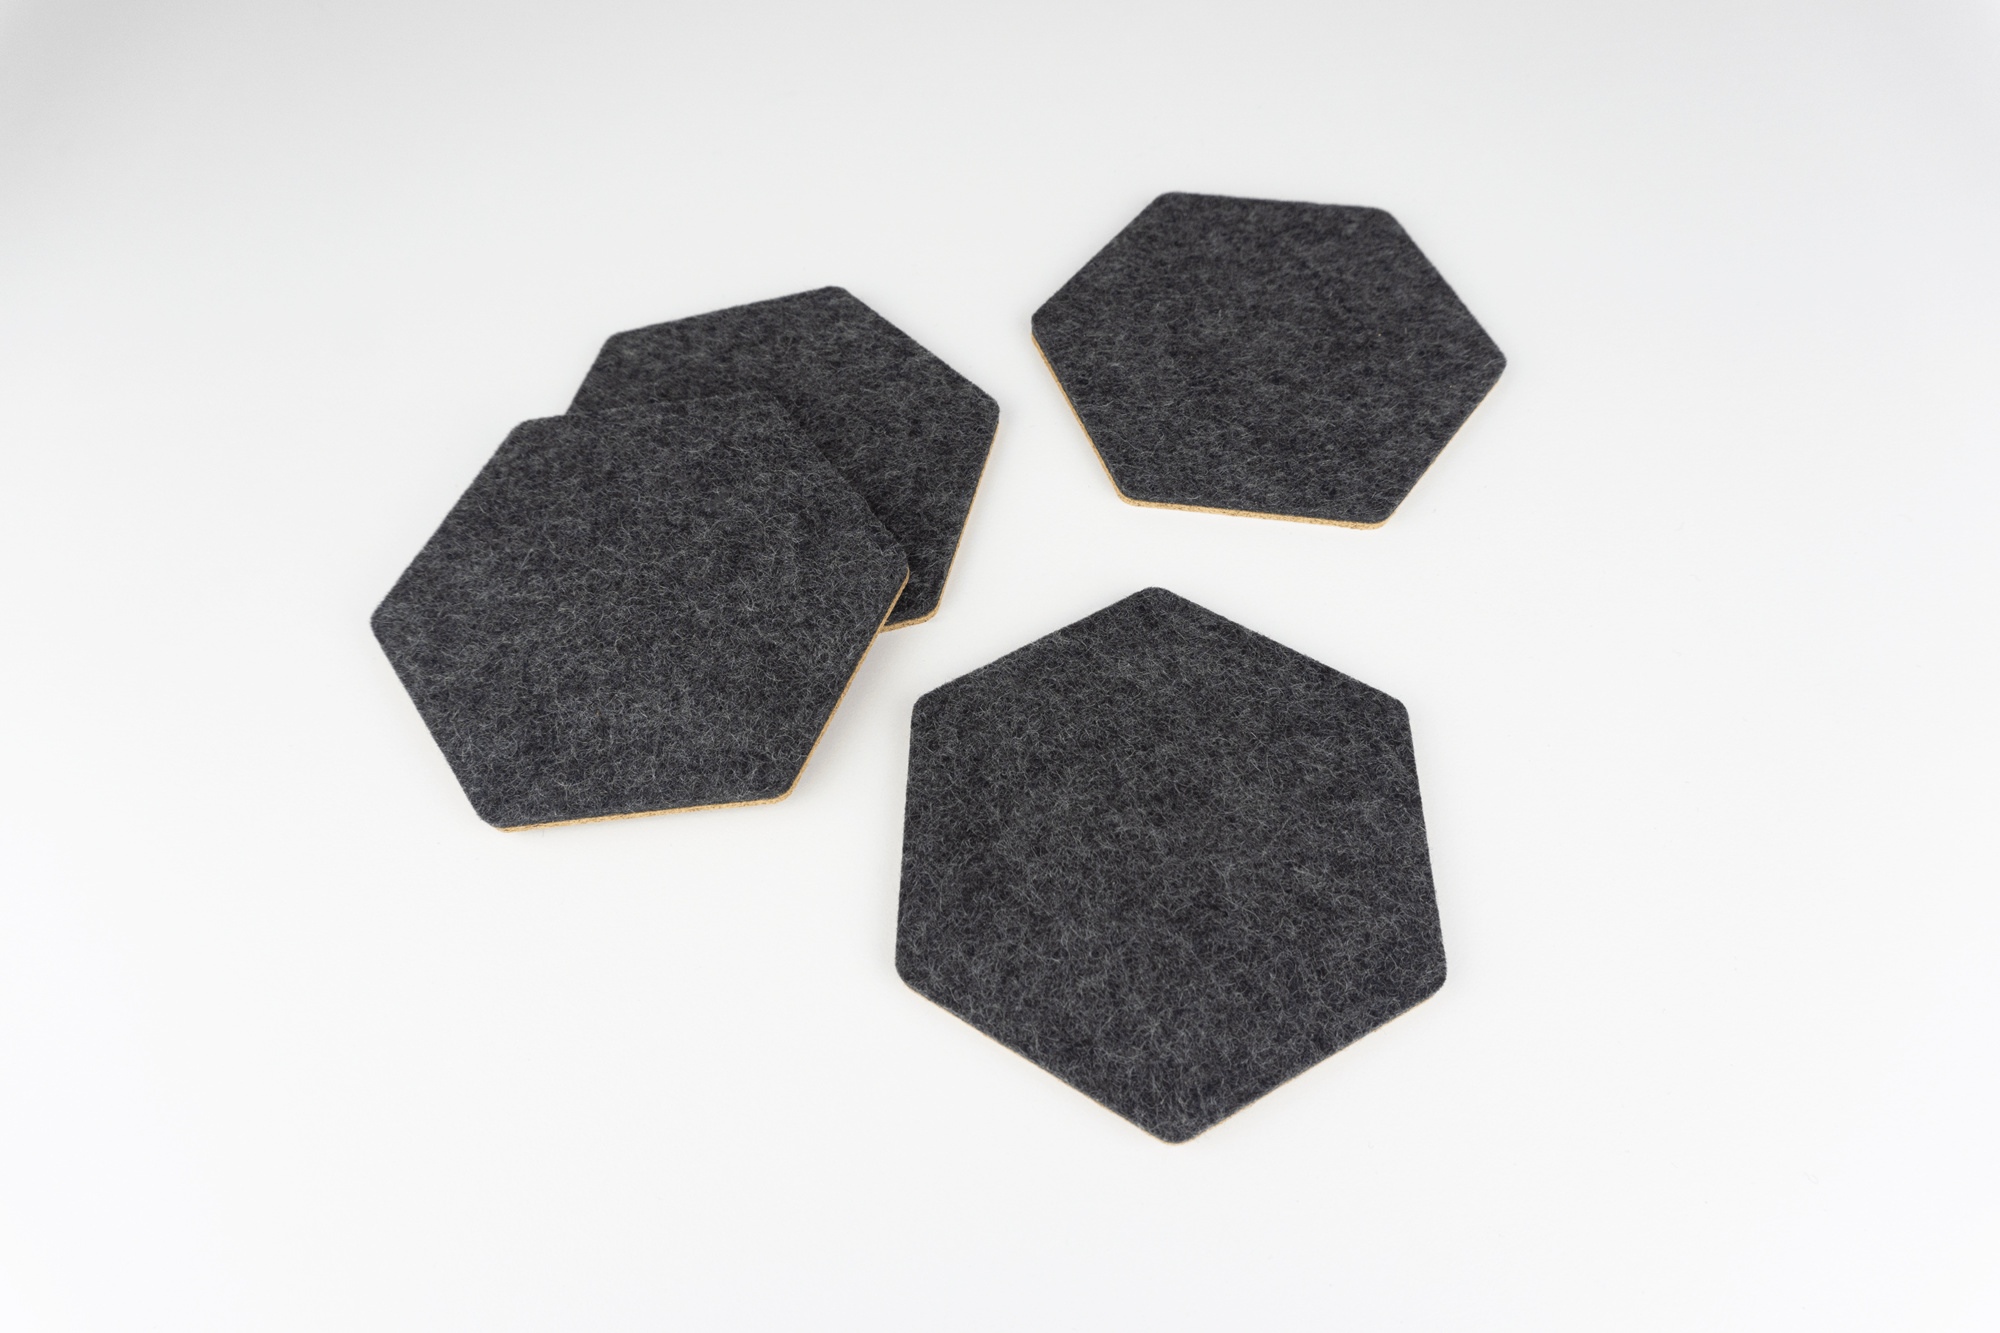 A set of 4 black wool and cork hexagon coasters shown on a white desk spread out.